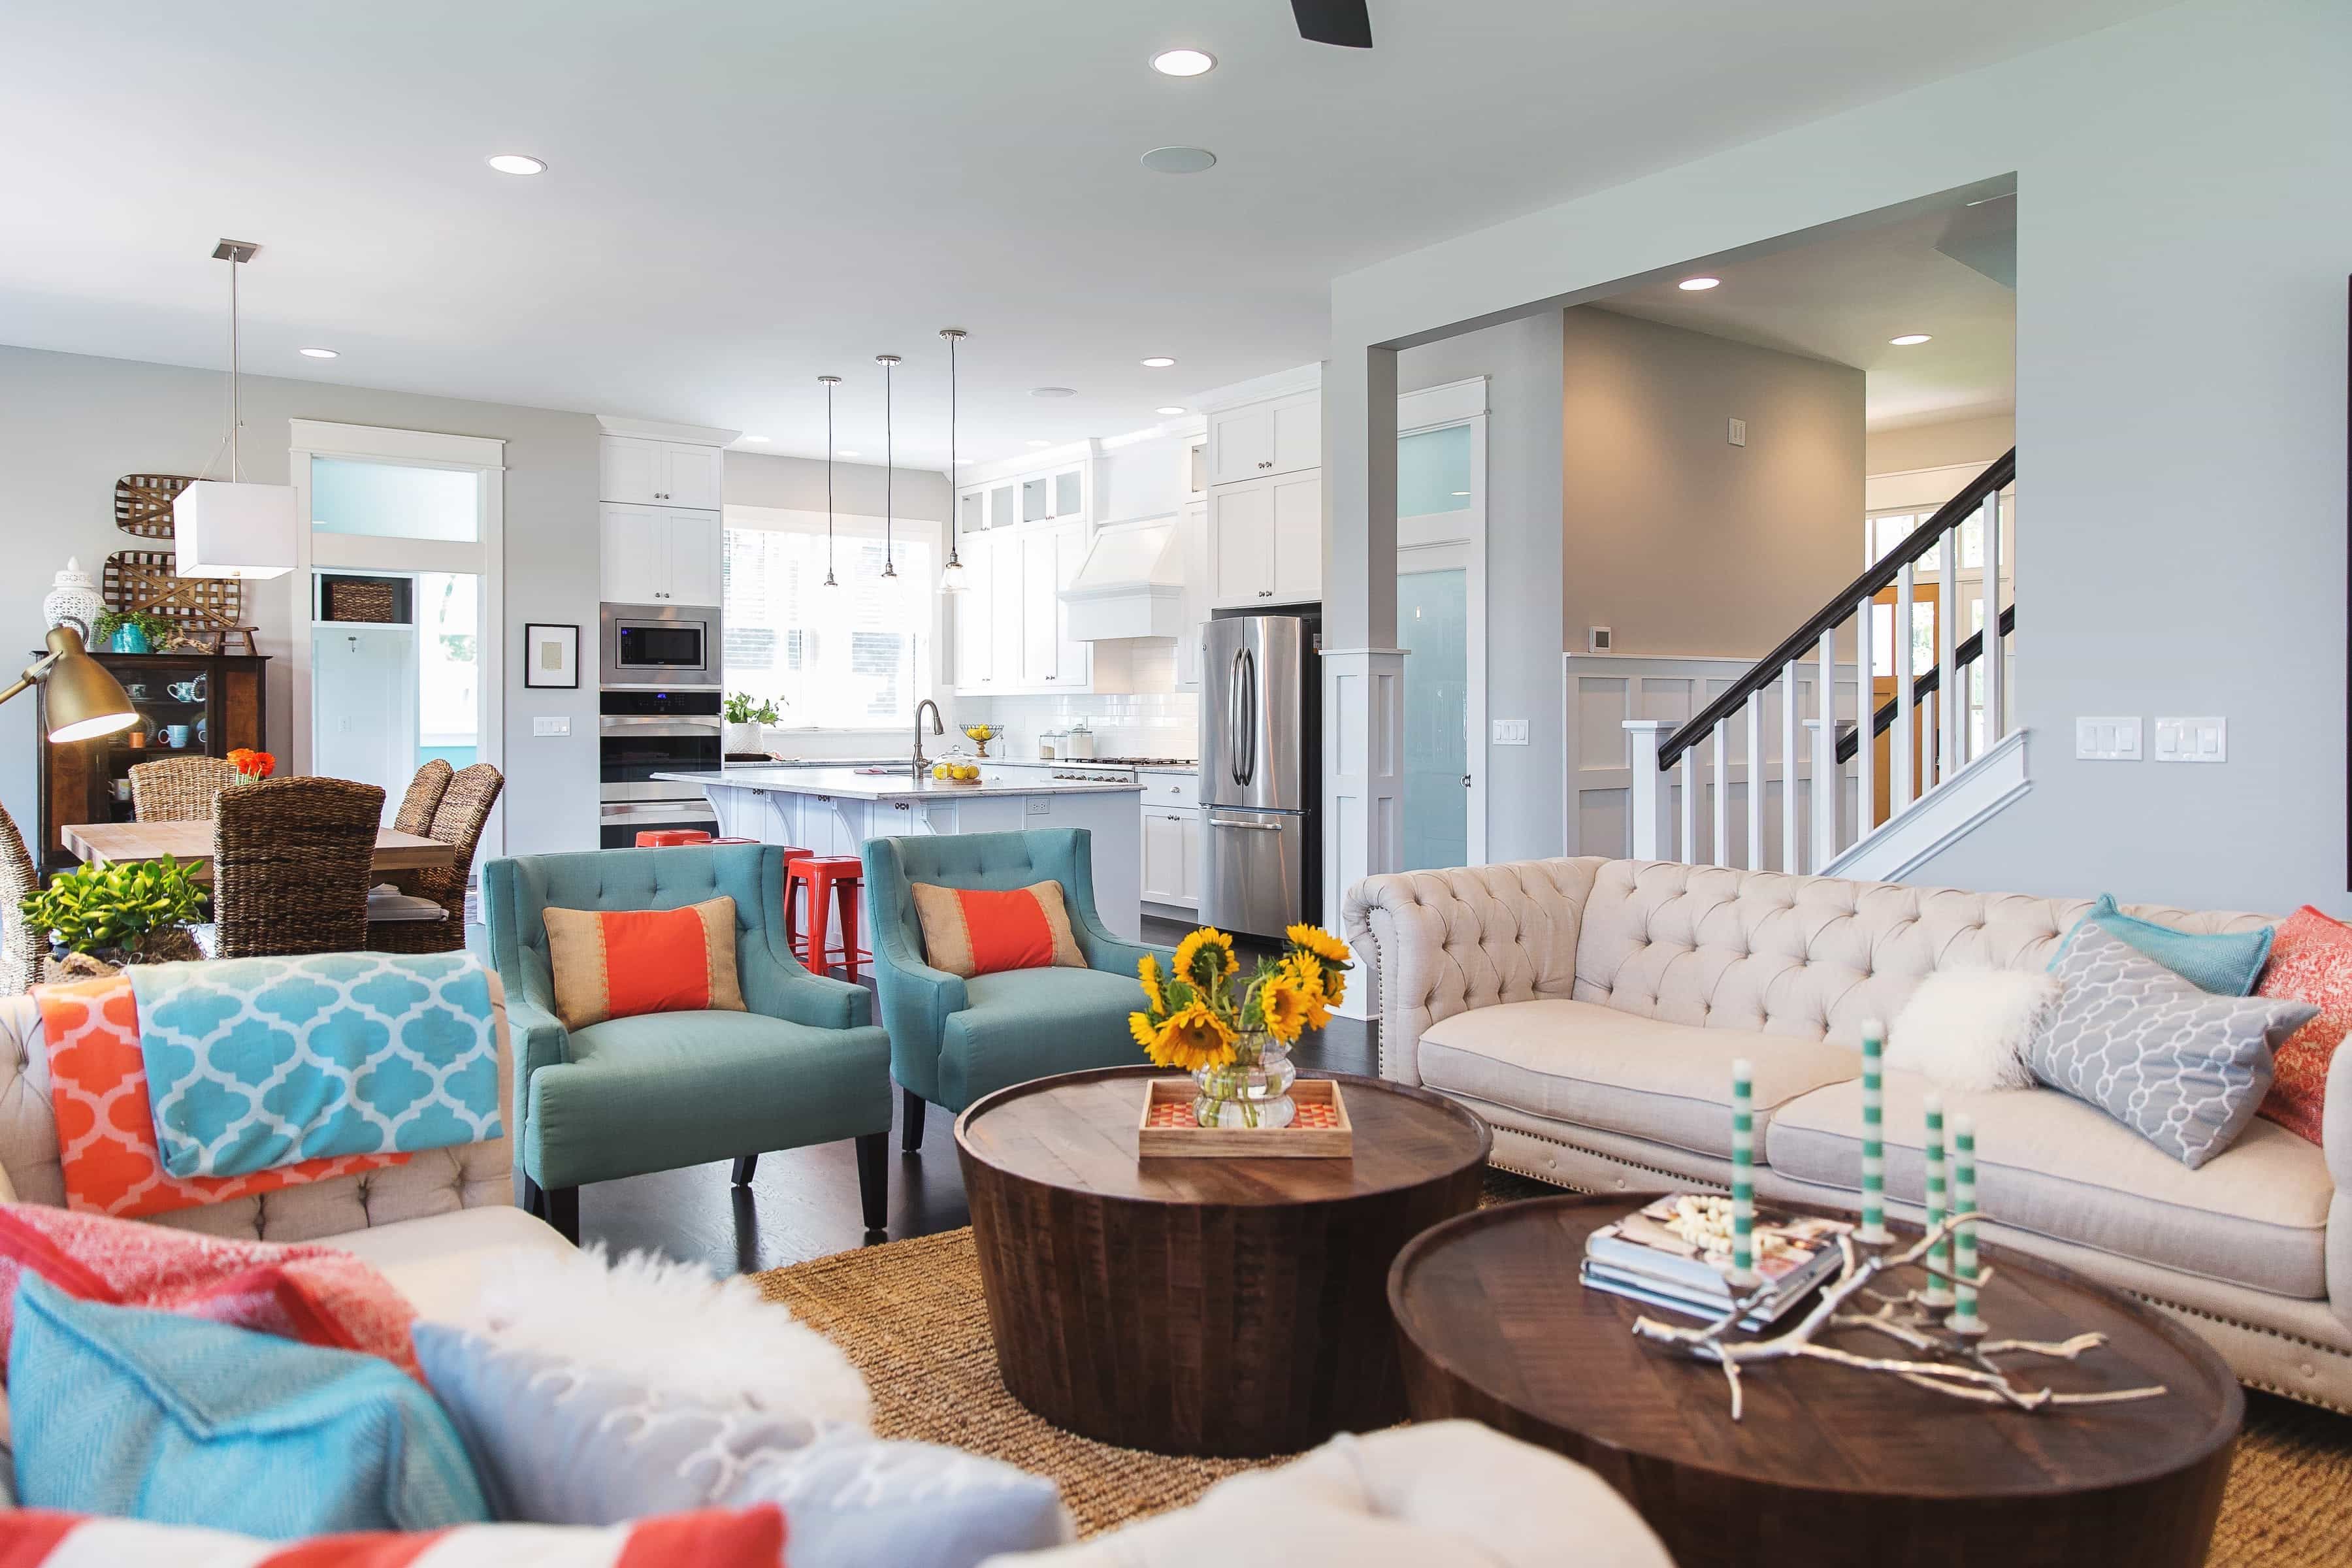 Pottery Barn Inspired Living Room Features Beige Sofa And Turquoise Armchairs (View 11 of 15)